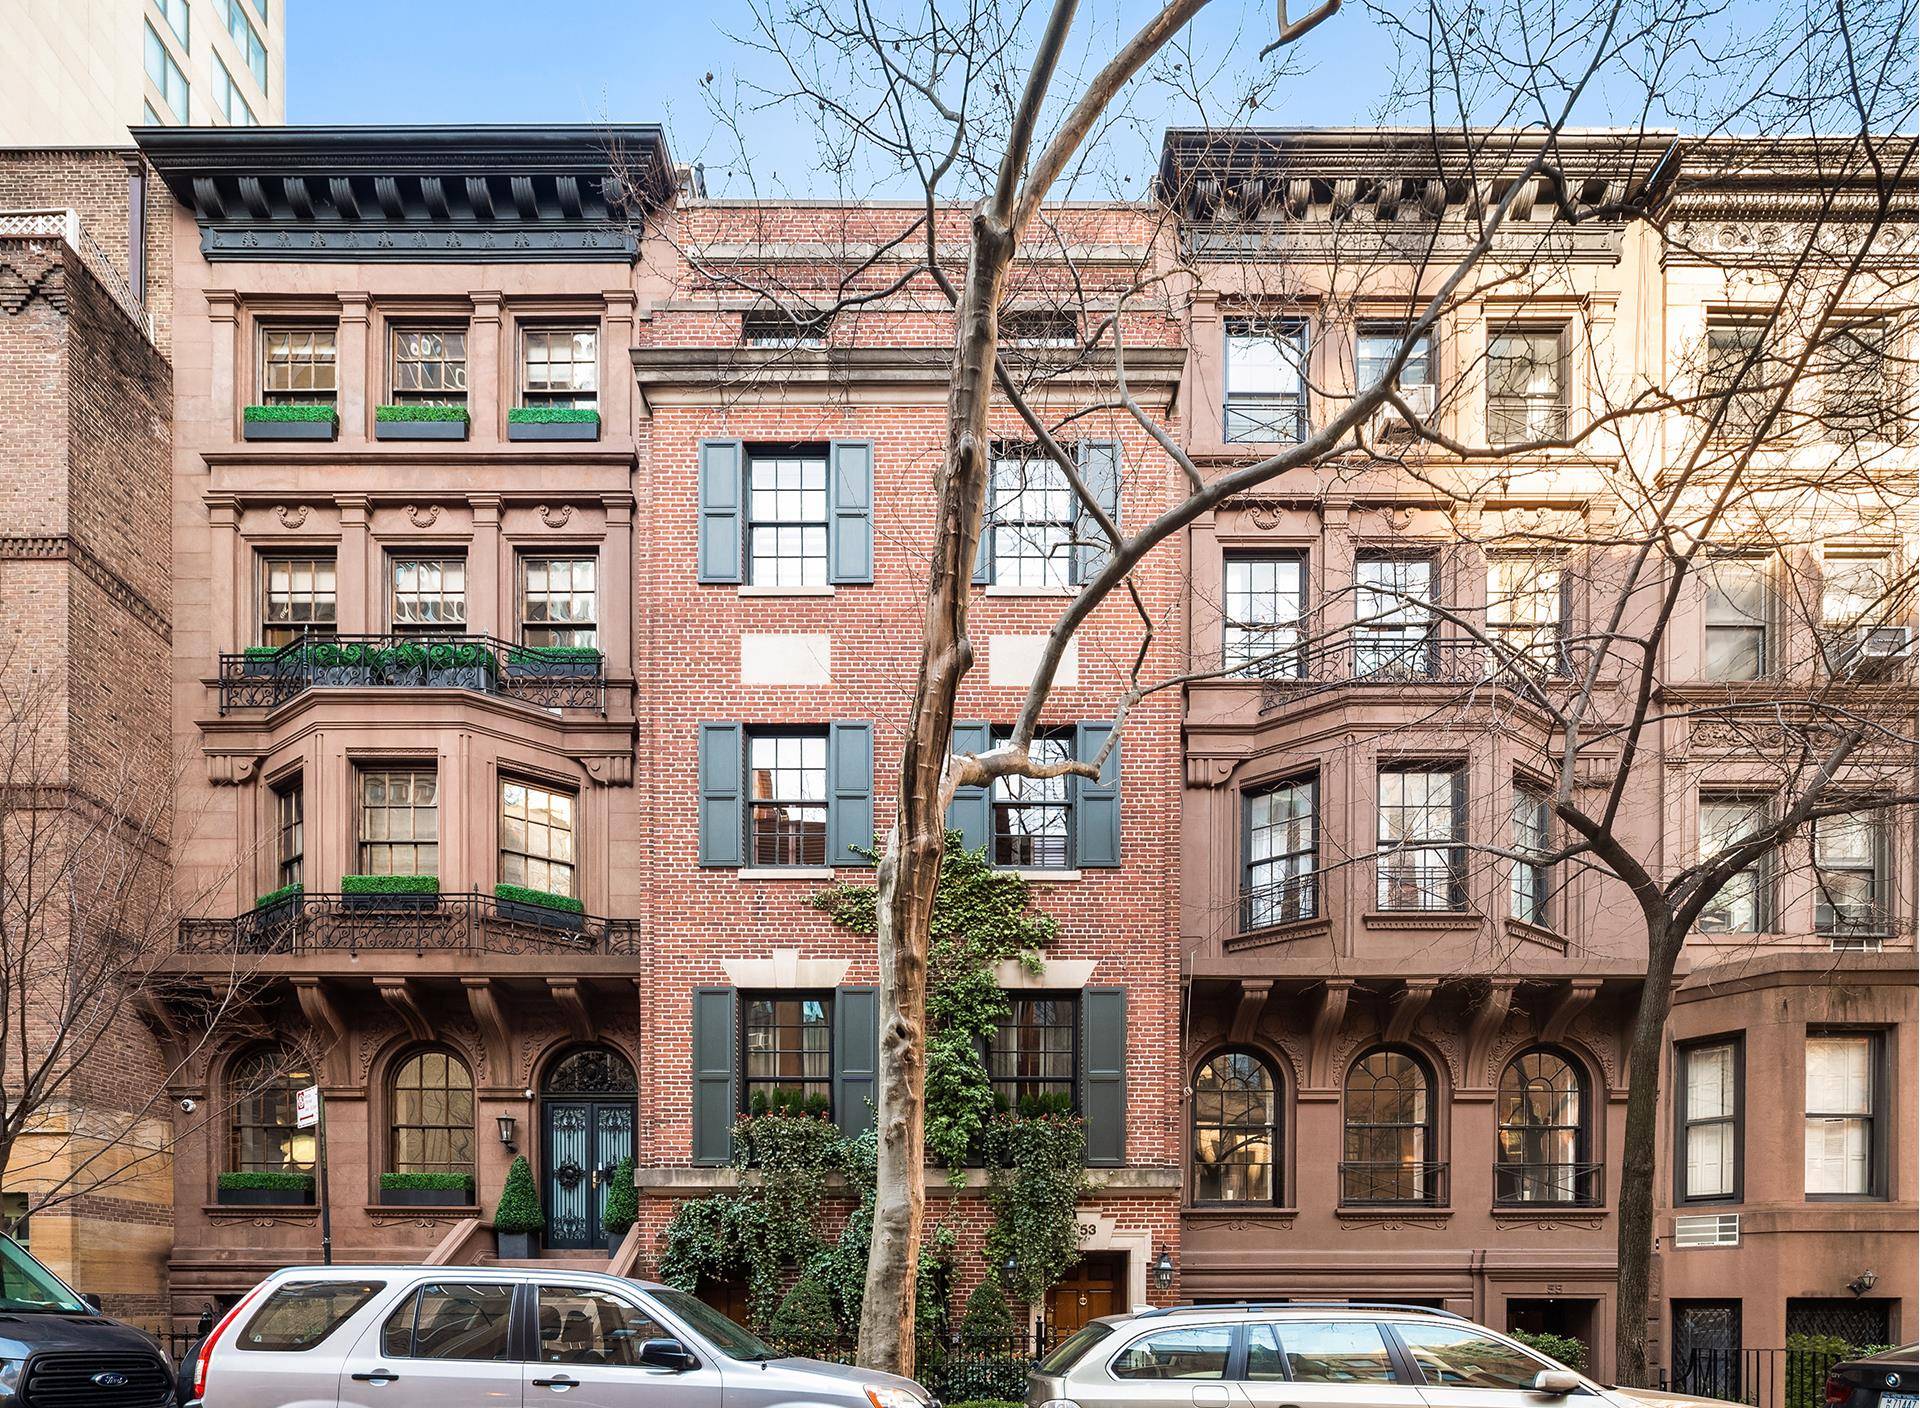 53 East 80th Street is a spectacular 22' wide, 6 story single family townhouse with 14 rooms, 7 bedrooms, 7 full bathrooms, 7 fireplaces, 2 powder rooms and elevator.